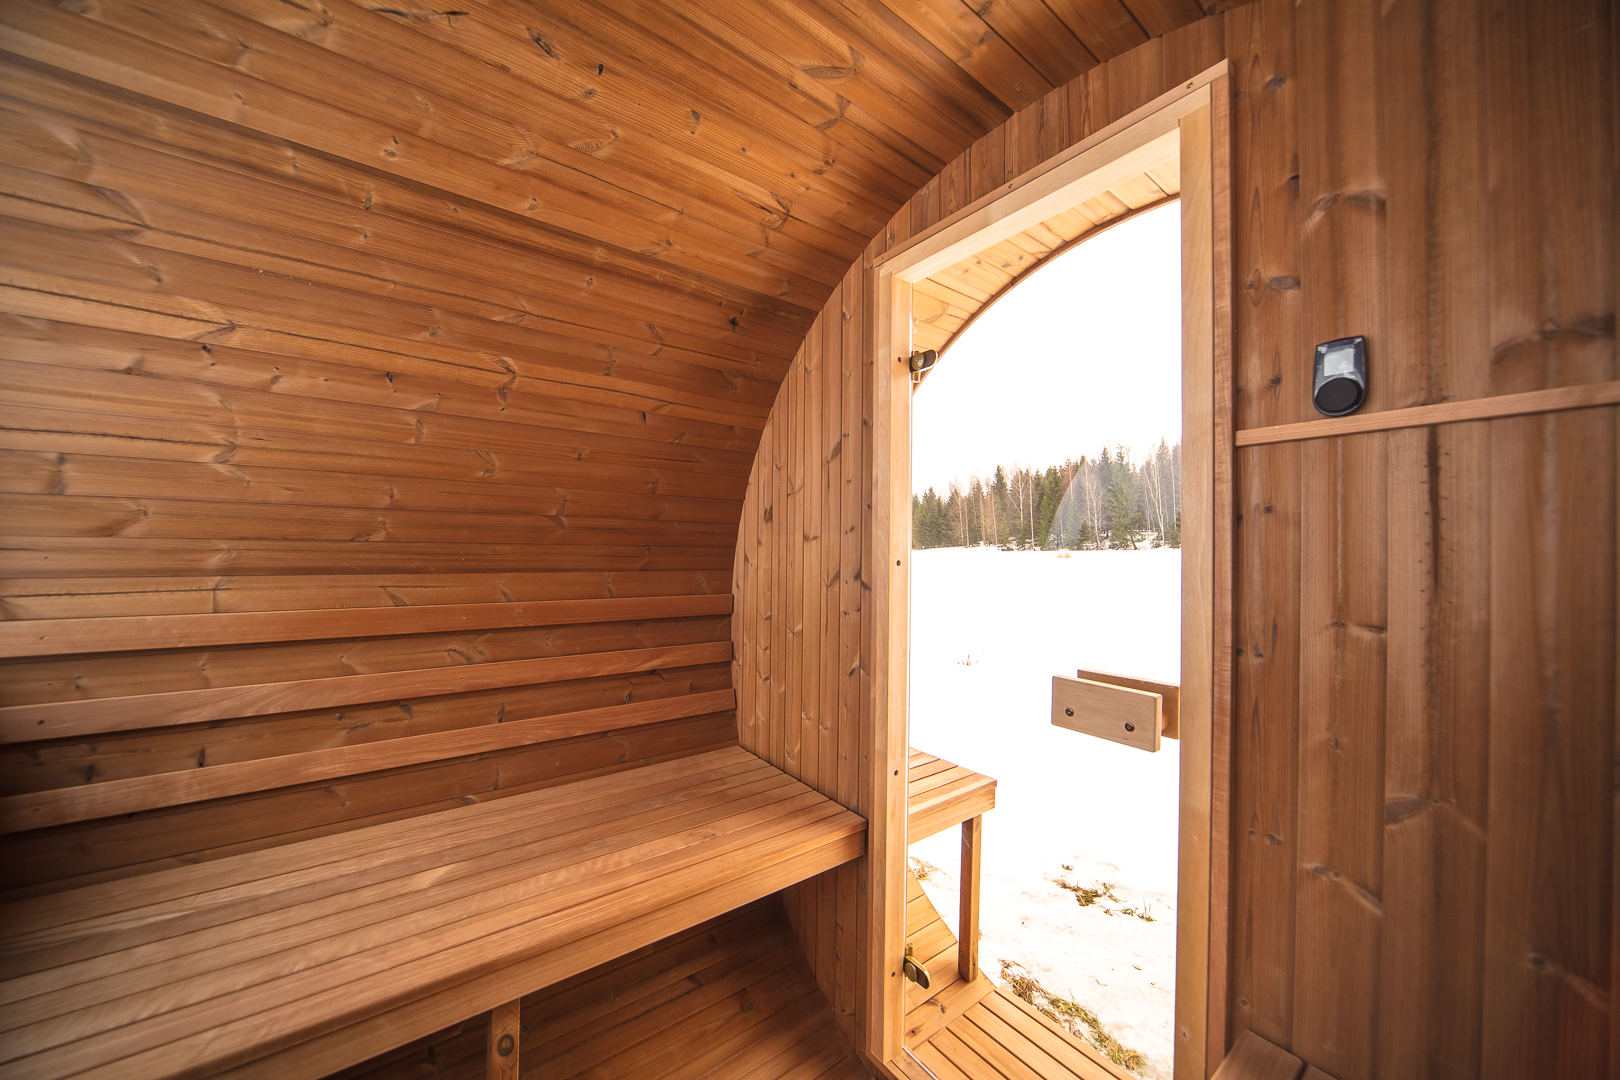 General Manager for SAUNA by Thermory